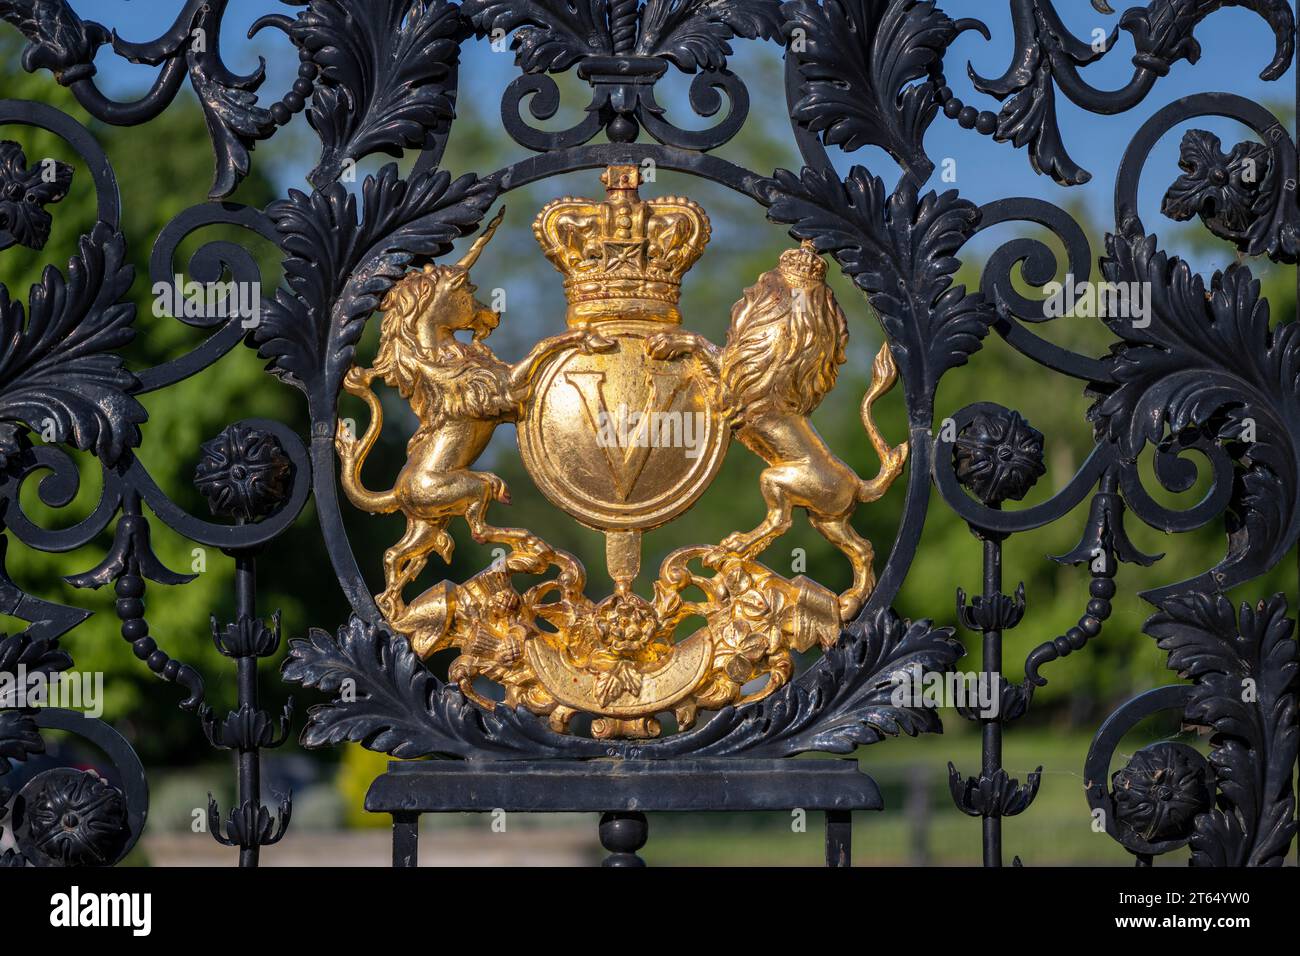 Golden coat of arms with unicorn and lion, Royal Botanic Gardens (Kew Gardens), UNESCO World Heritage Site, Kew, Greater London, England, Great Stock Photo